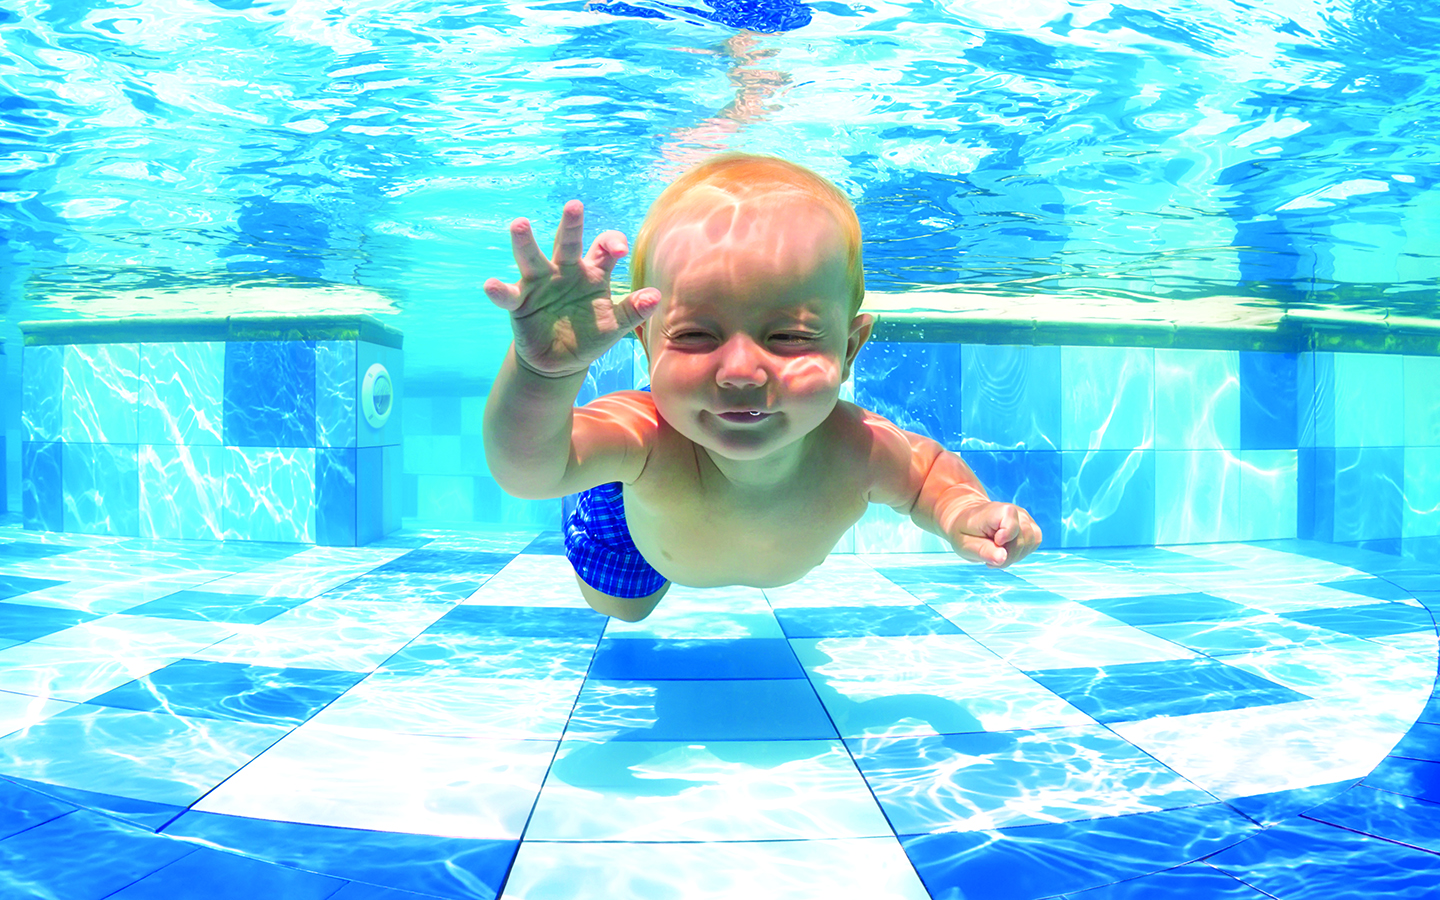 Baby in a pool